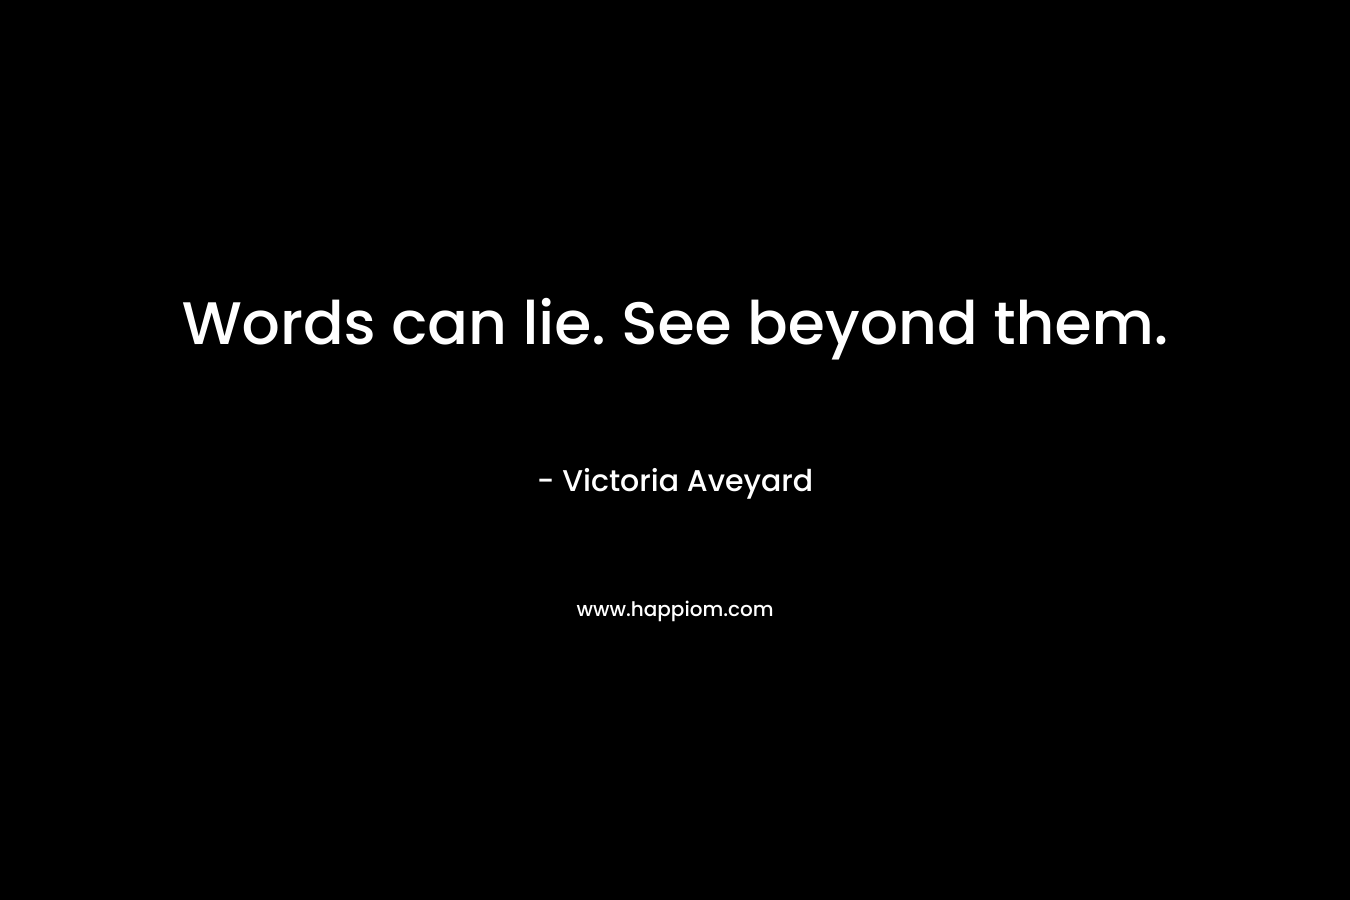 Words can lie. See beyond them.